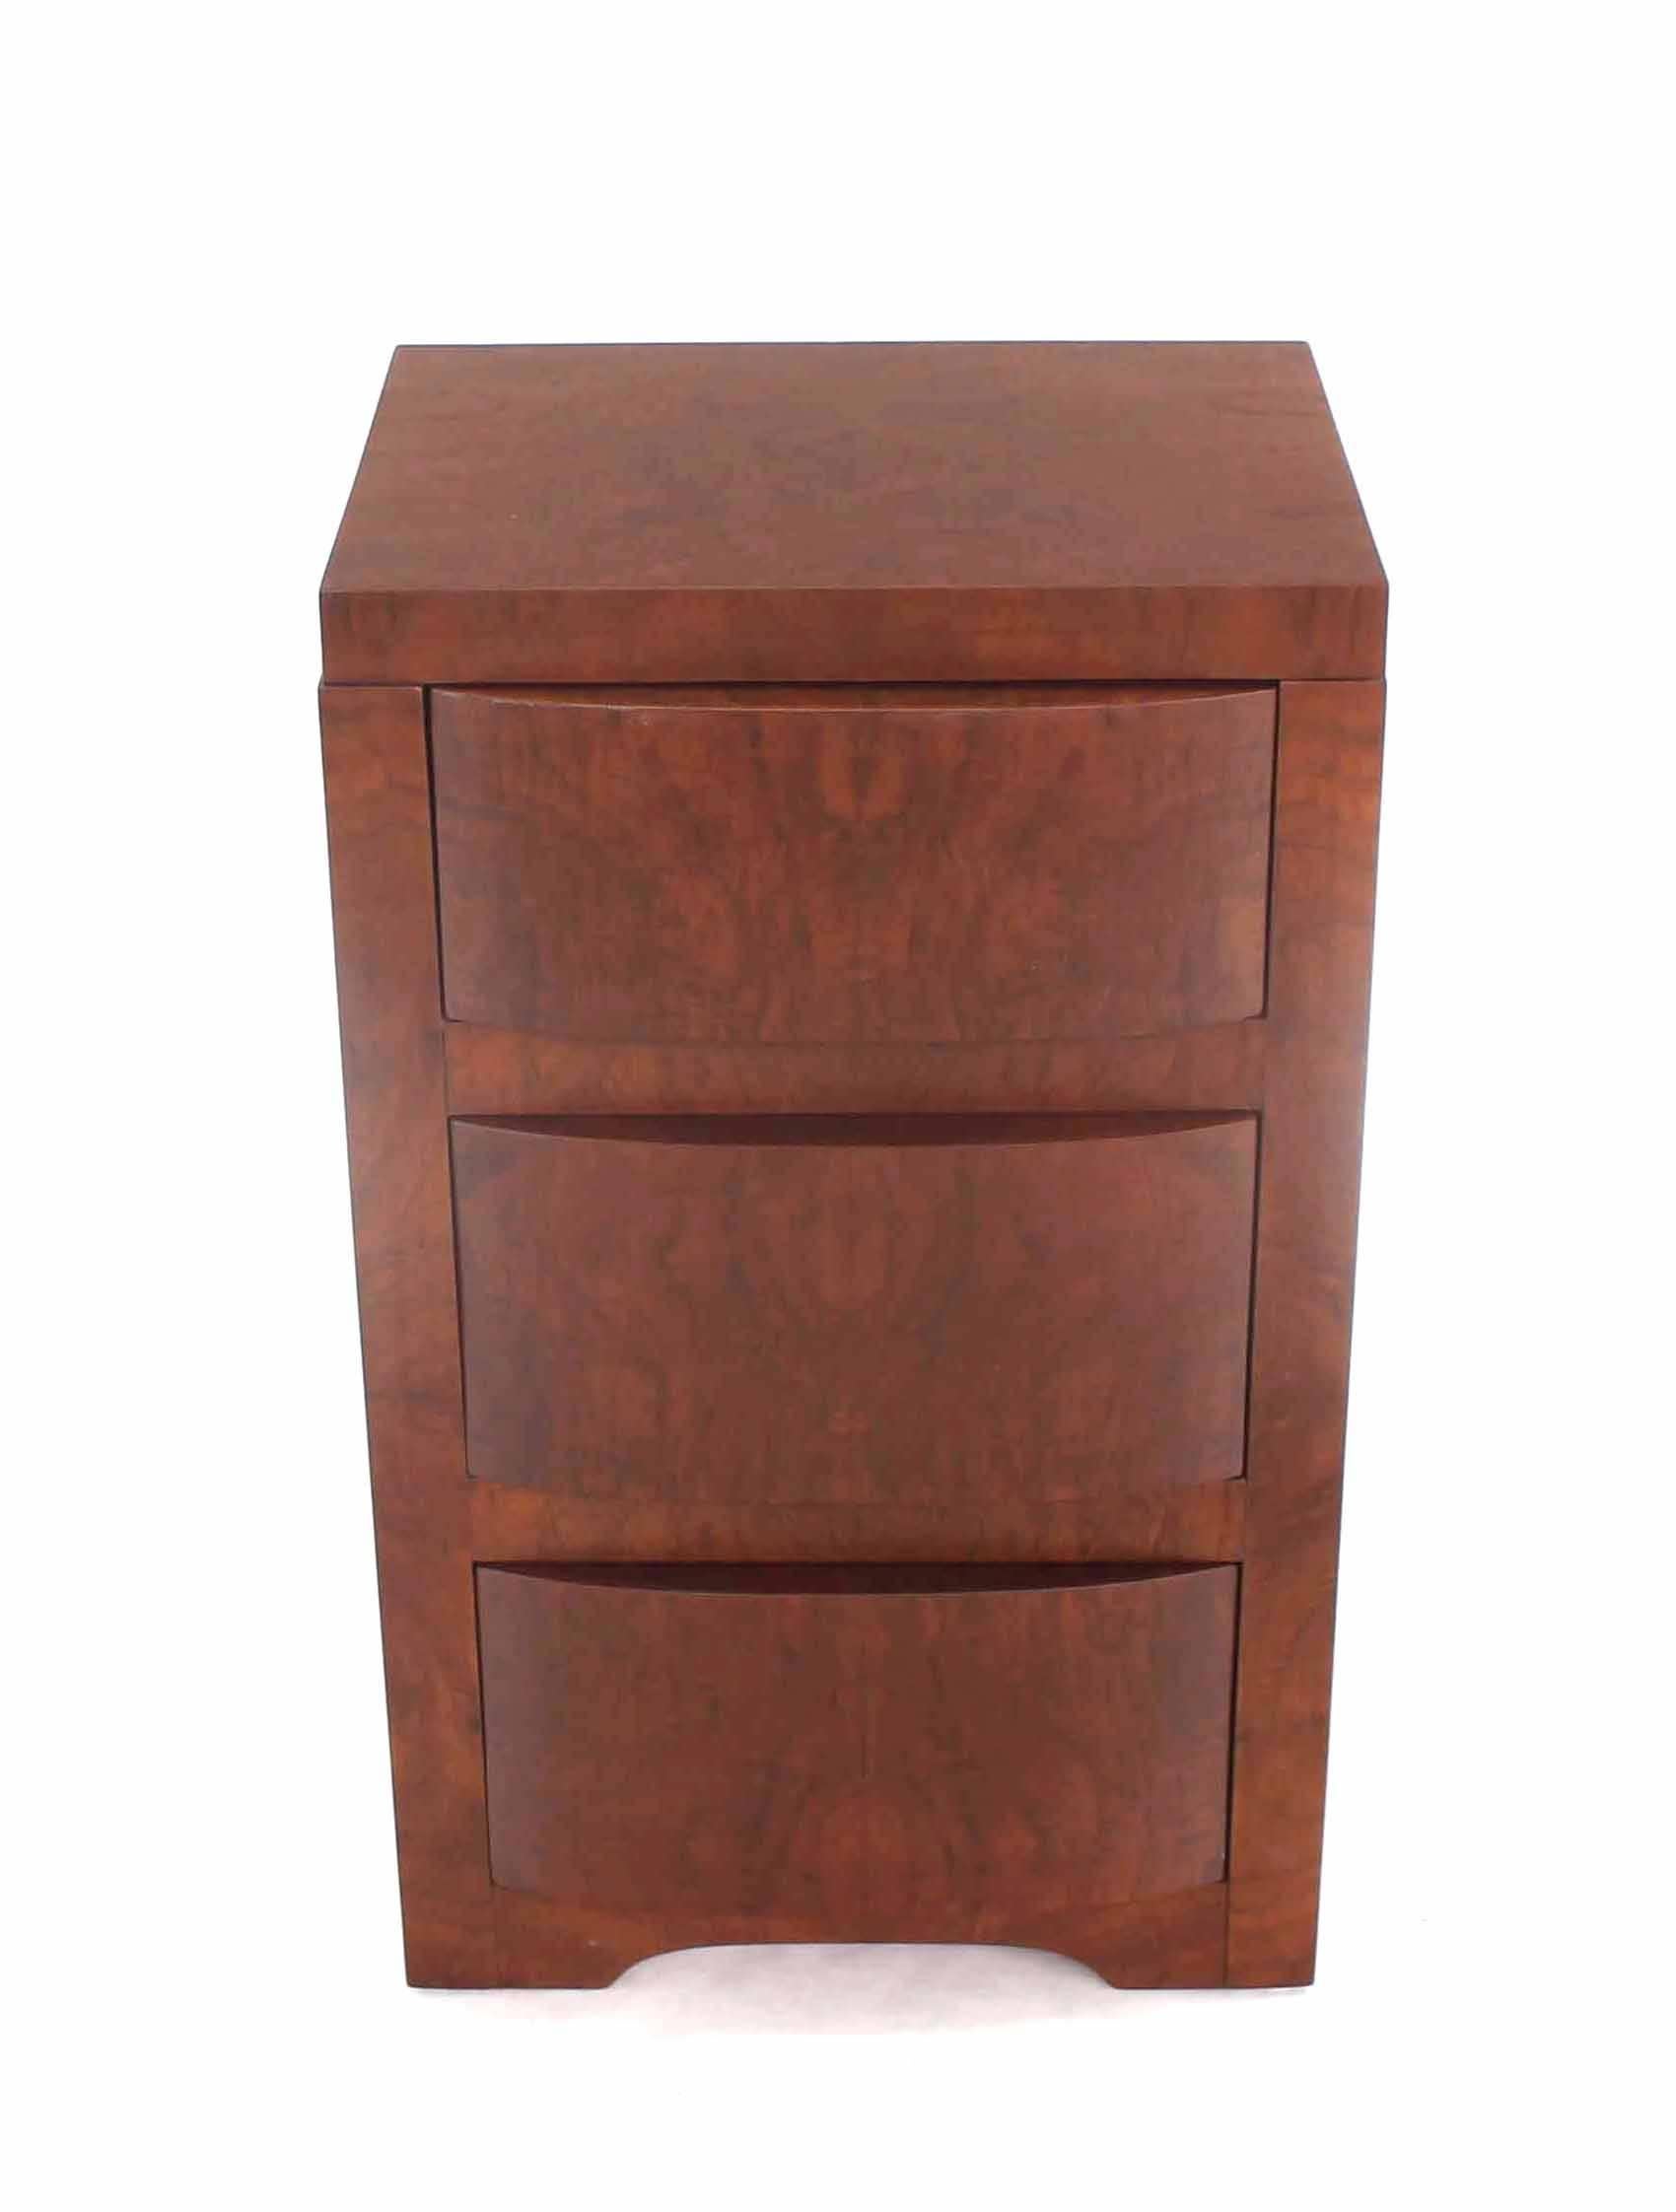 art deco side table with drawers